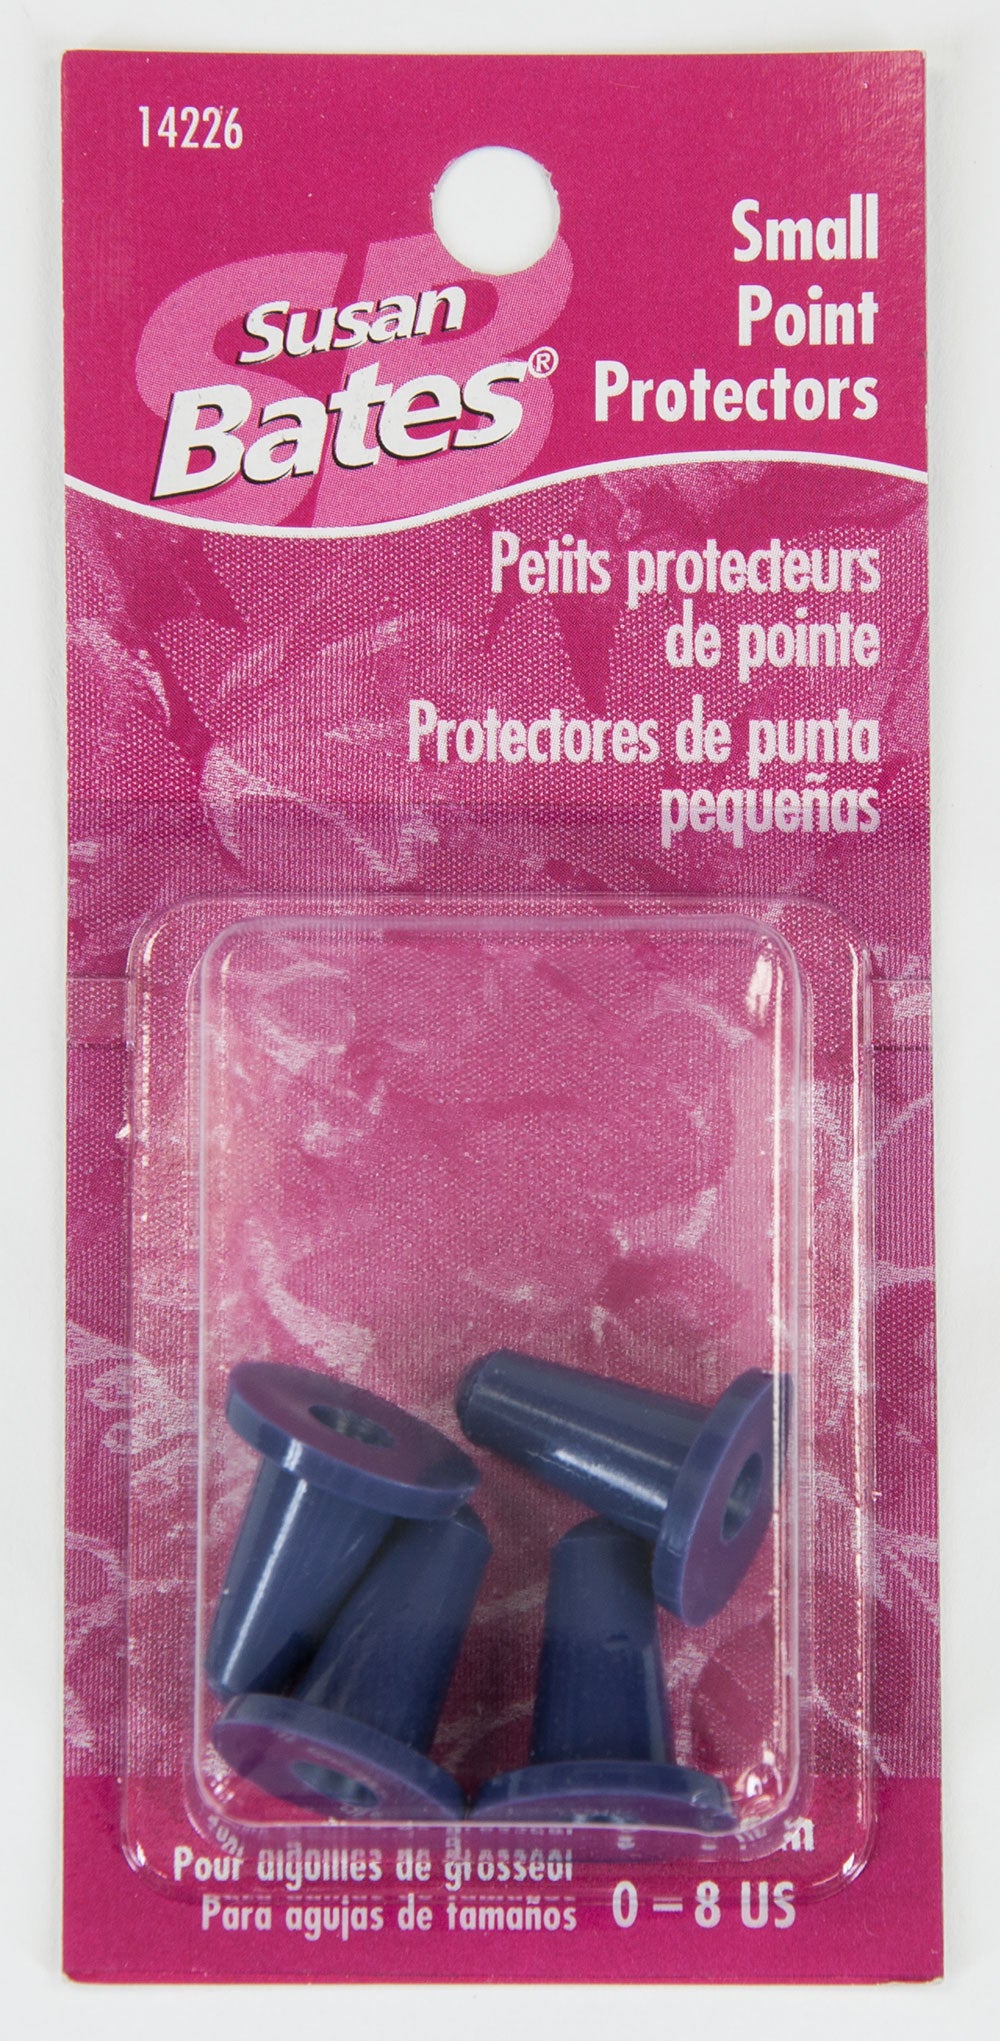 Small Point Protectors